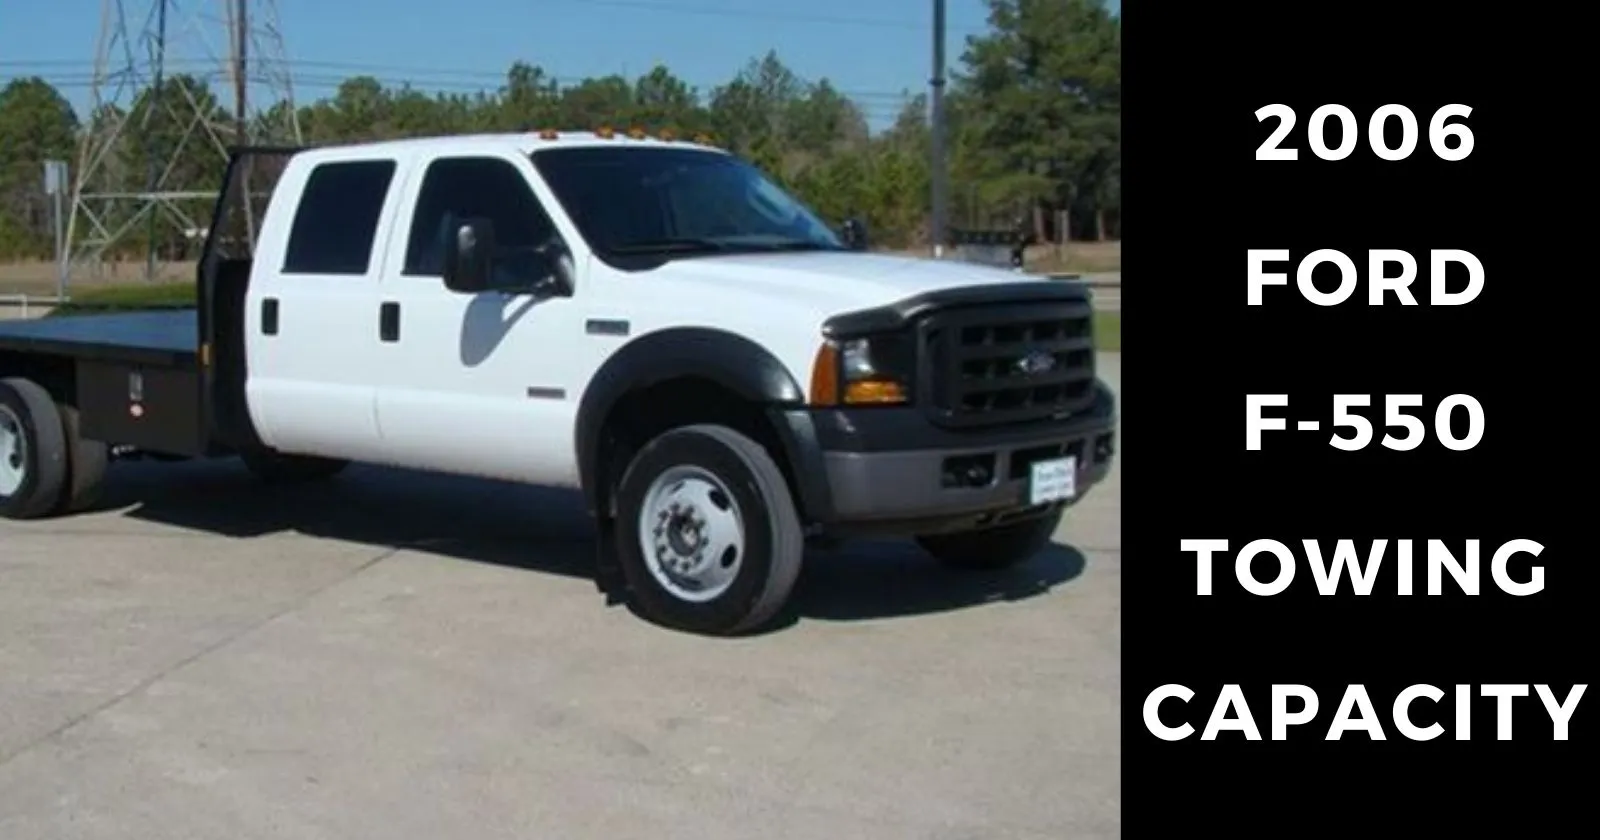 2006-ford-f550-towing-capacity-with-charts-thecartowing